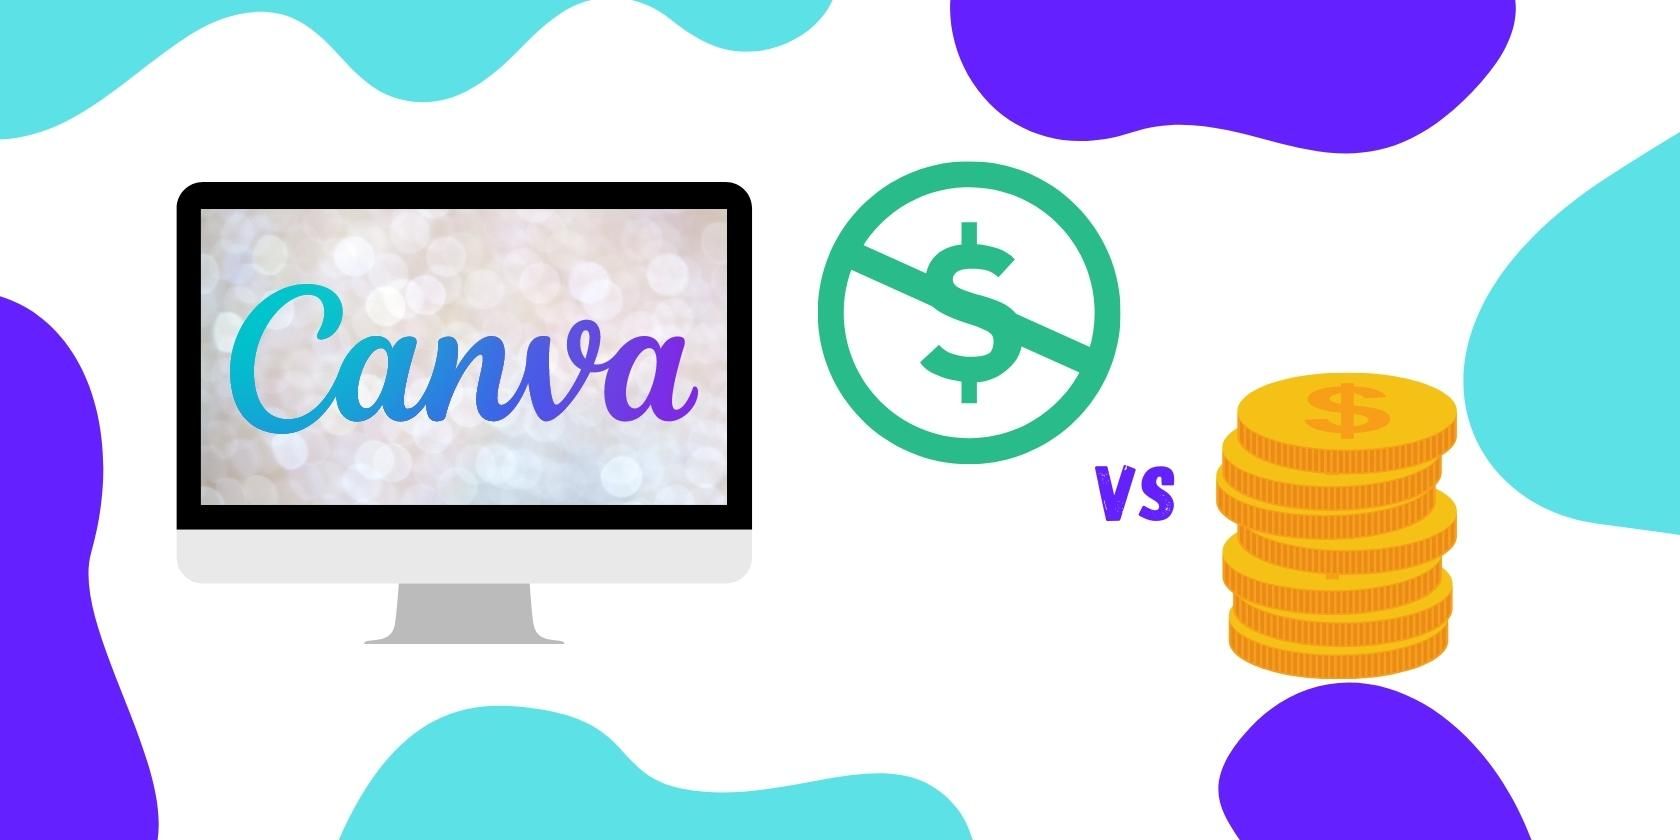 Canva free vs paid cover image